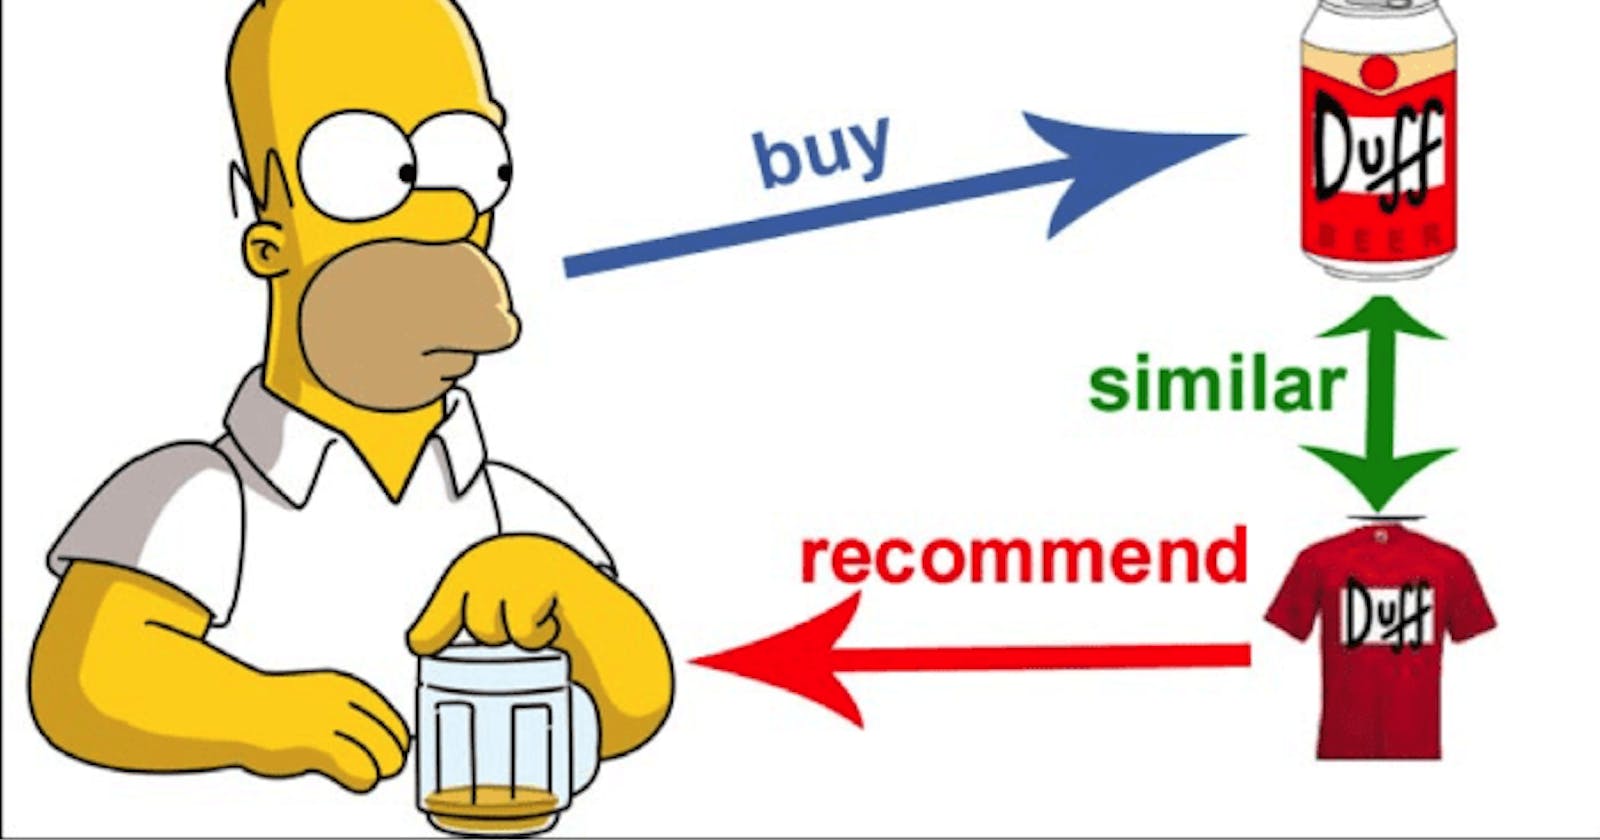 Recommendation Systems